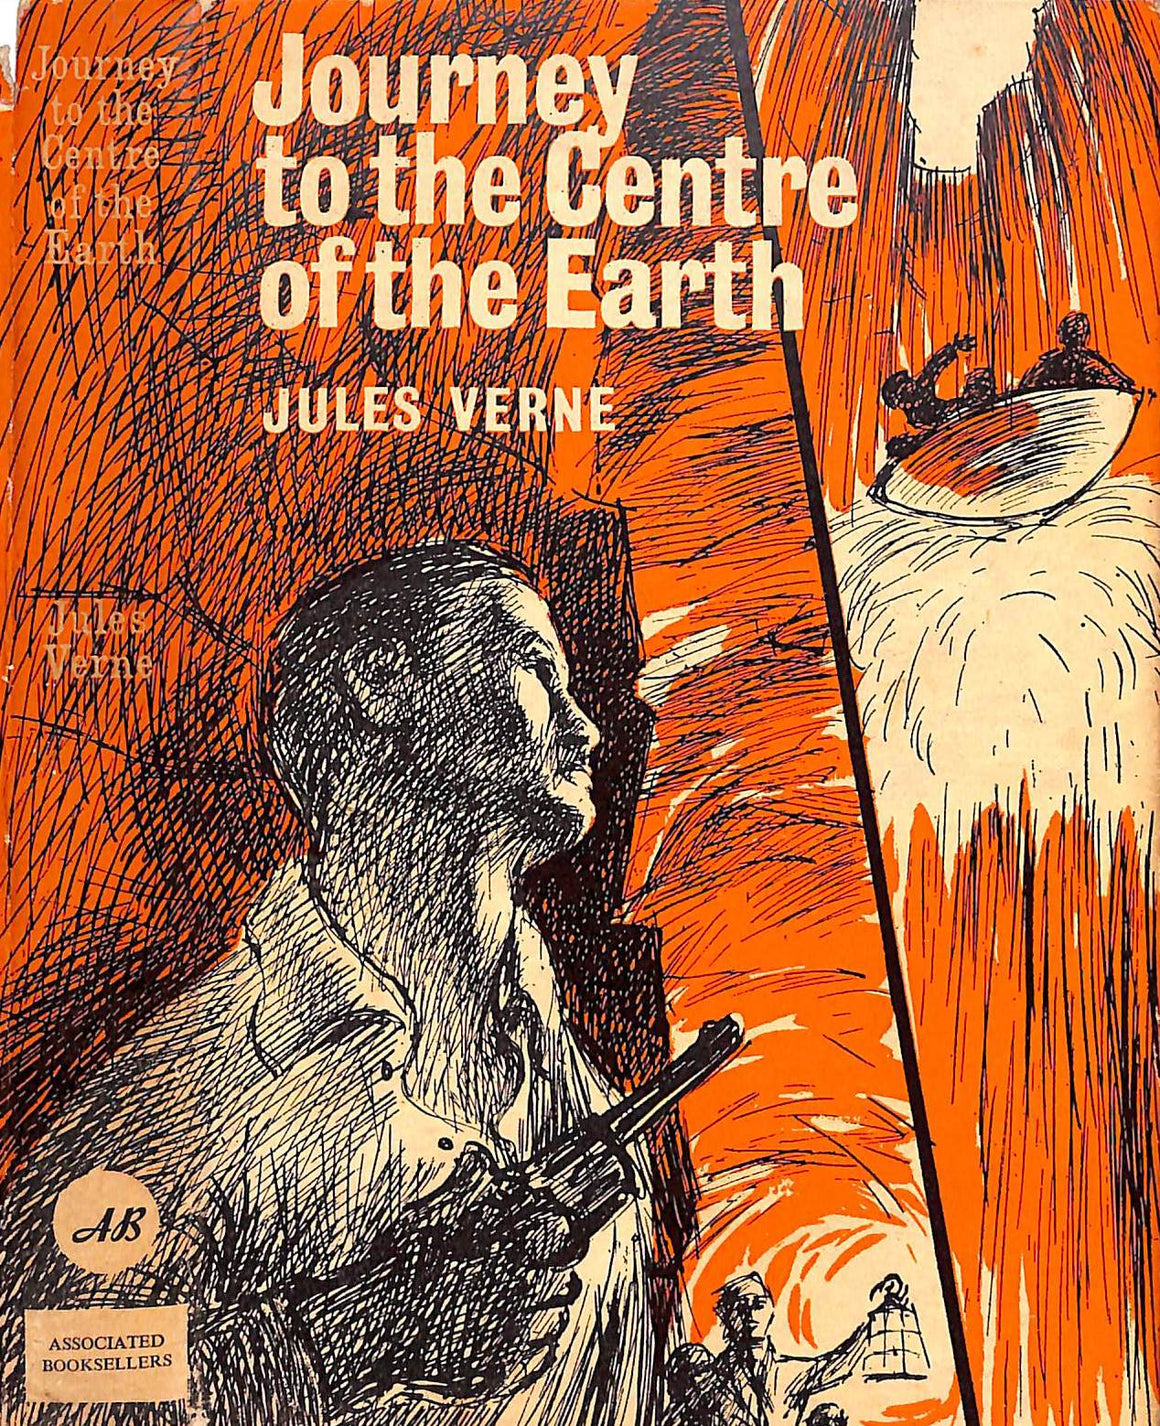 "Journey To The Centre Of The Earth" 1961 VERNE, Jules